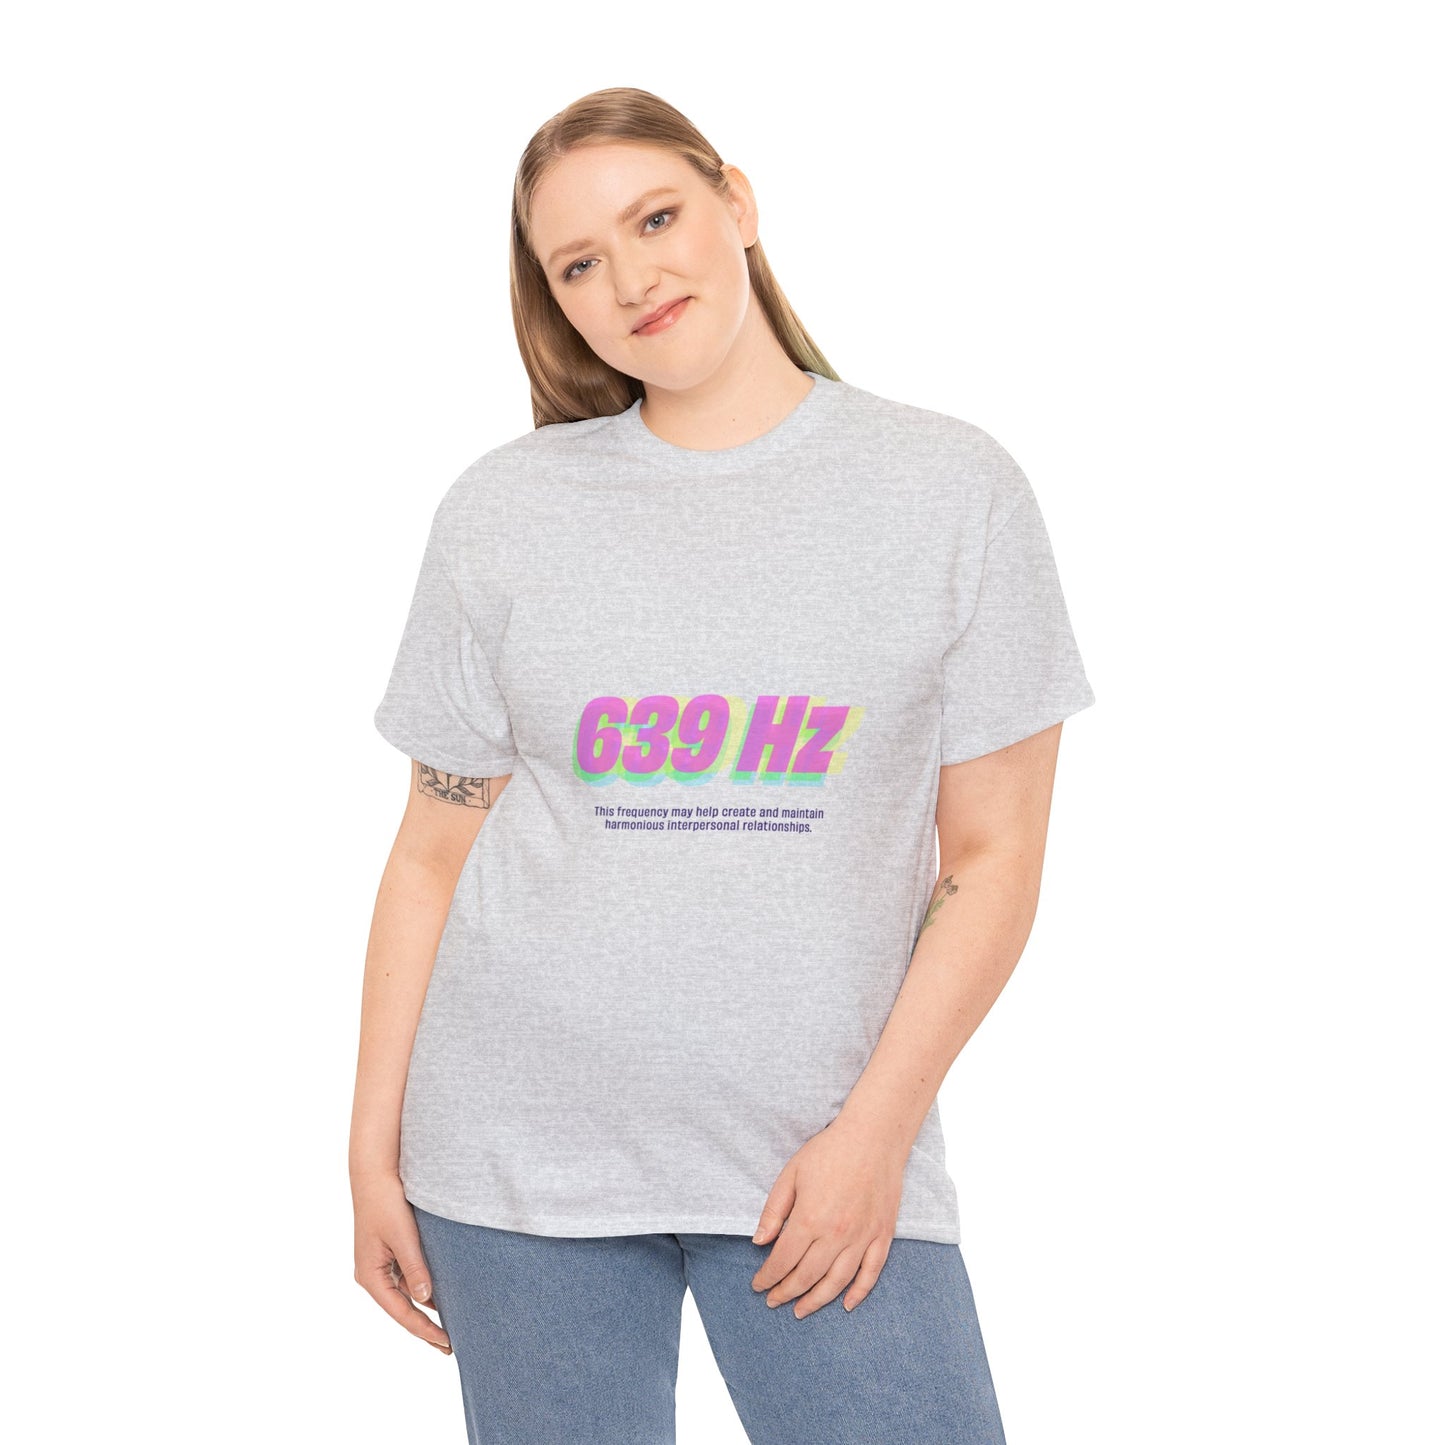 639 Hz Frequency T Shirt